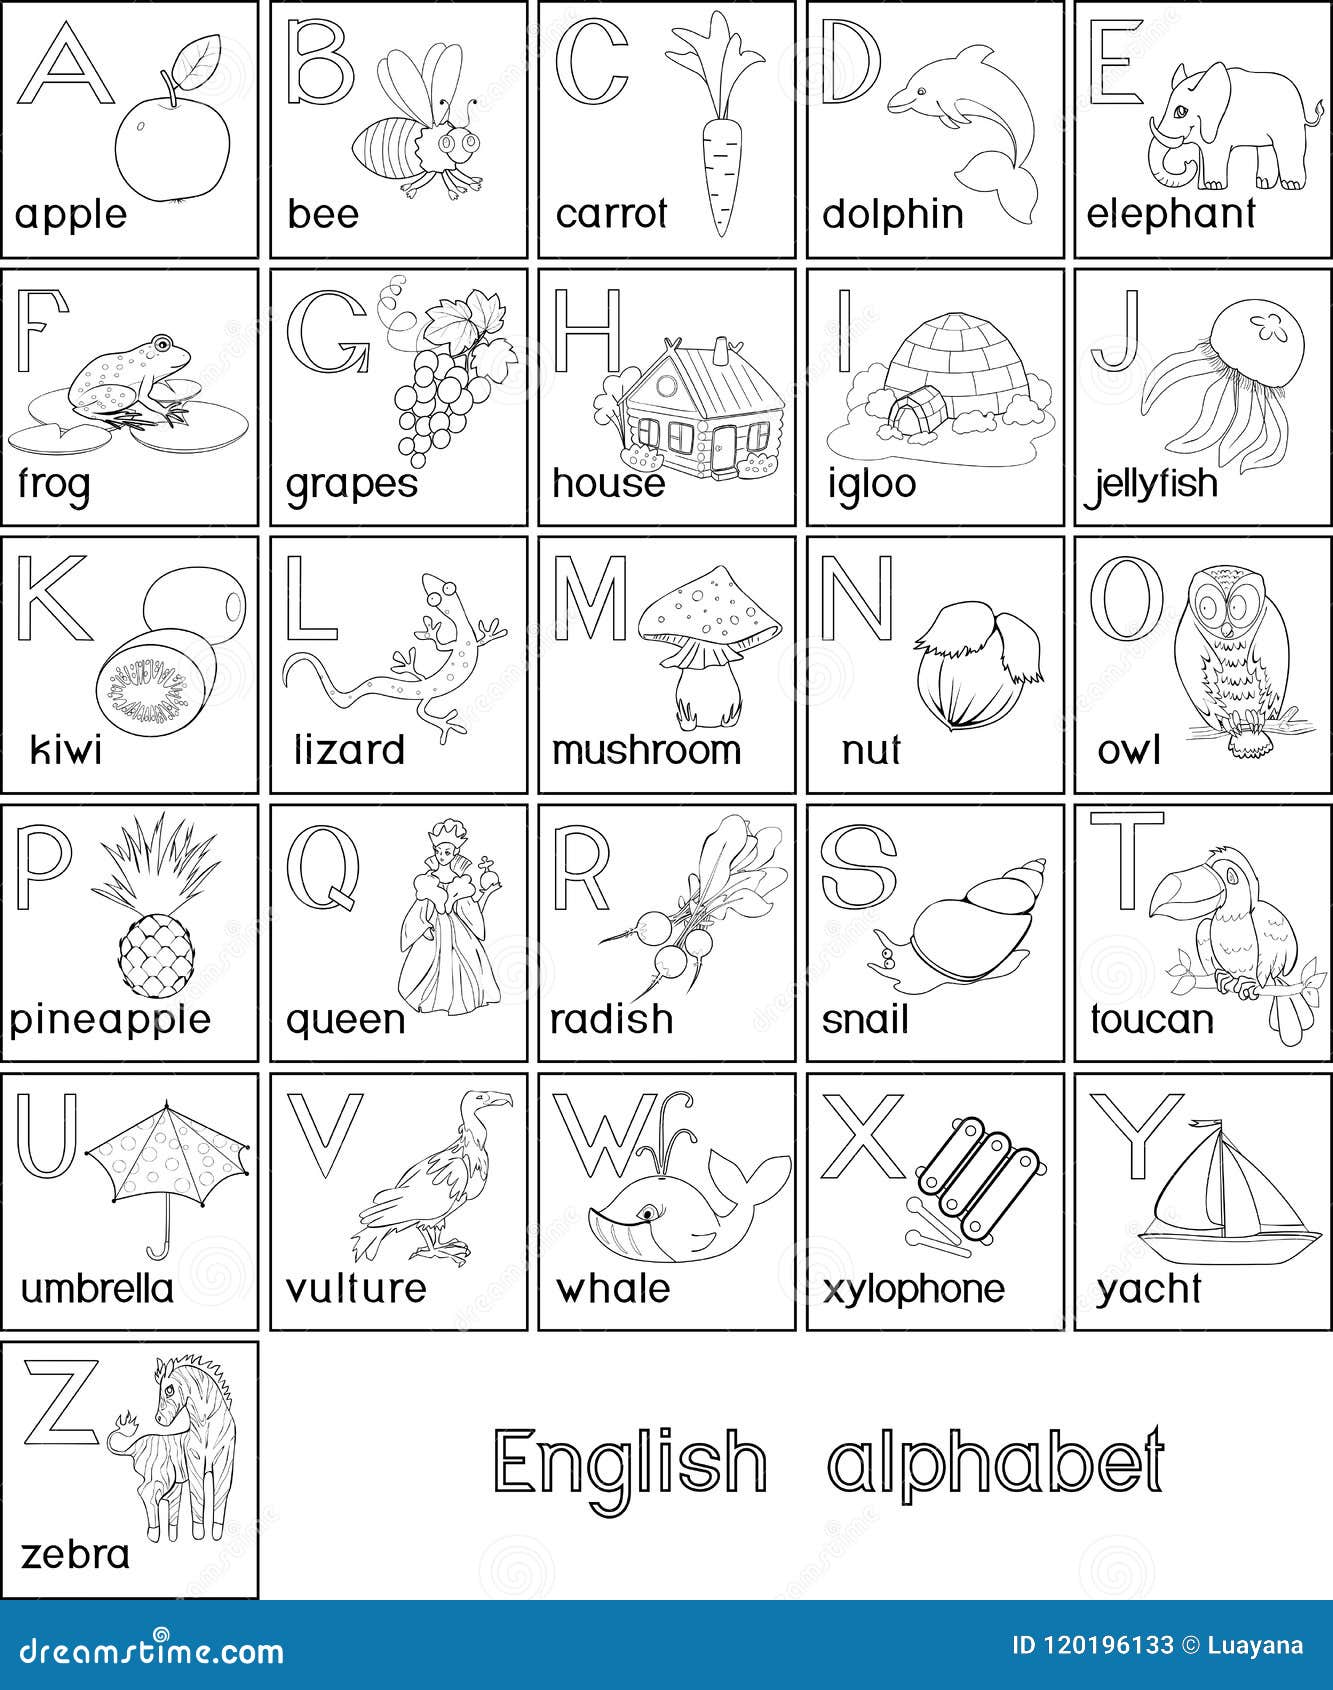 Coloring page english alphabet with pictures and titles for children education stock vector